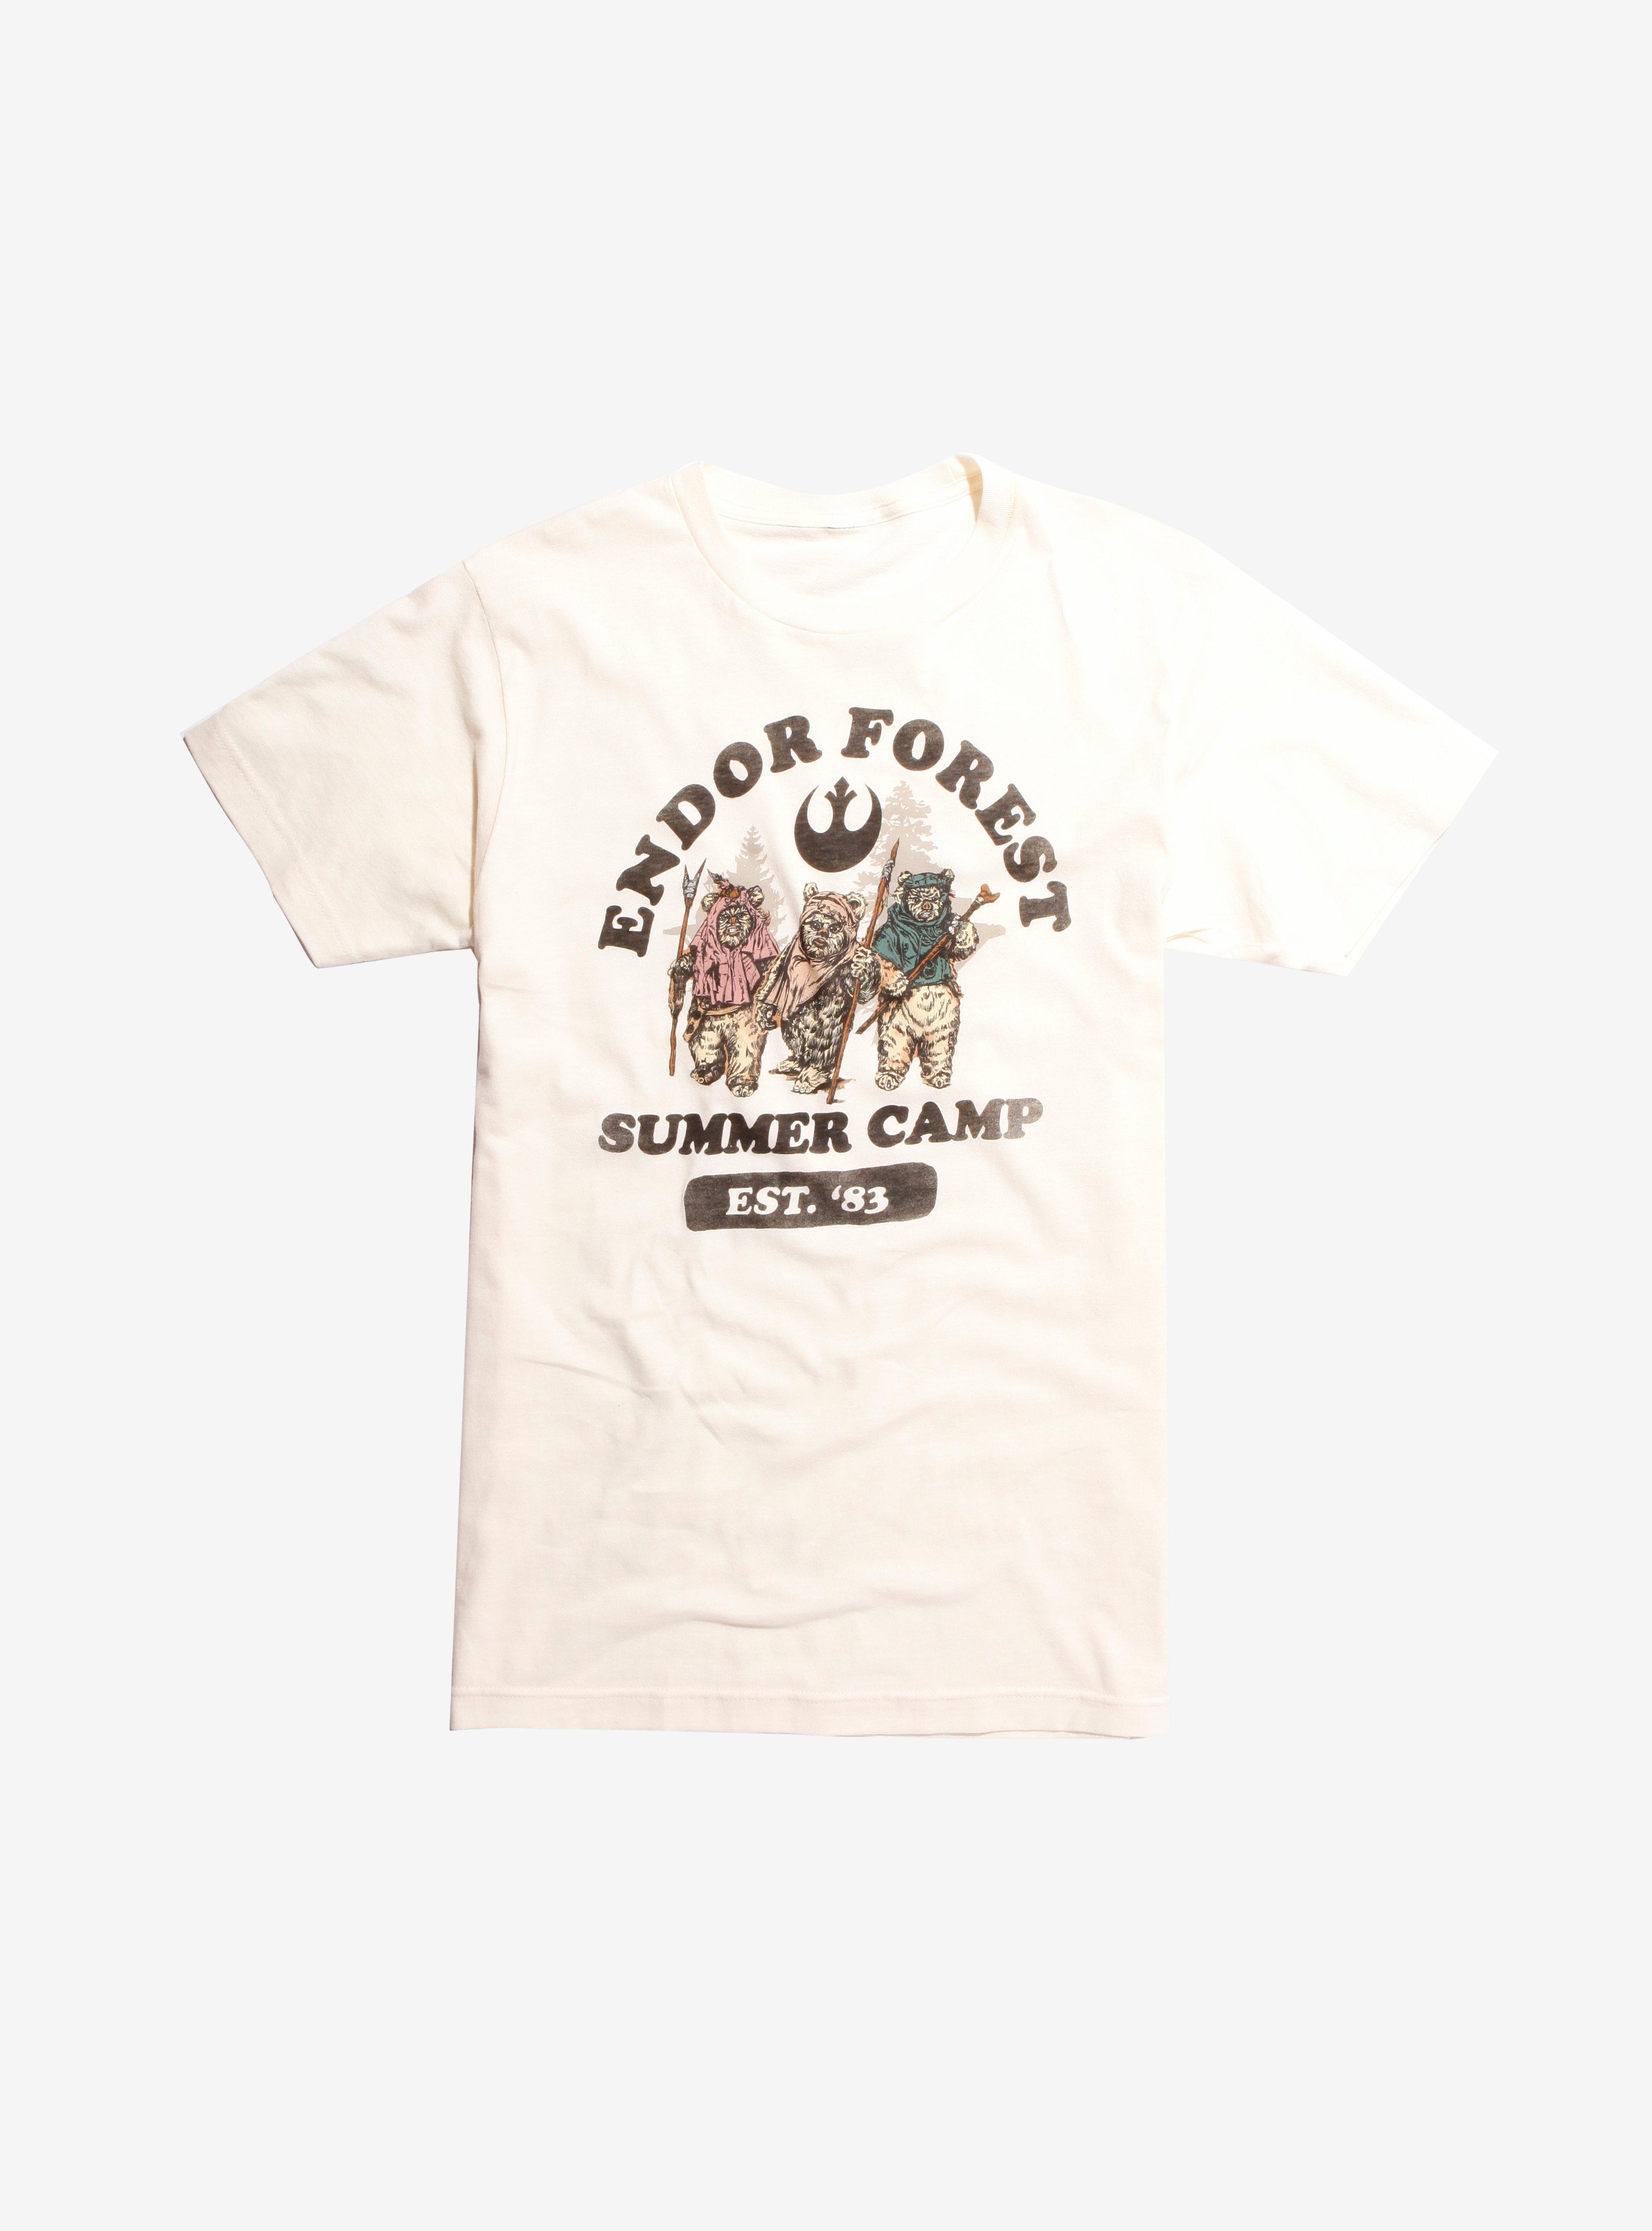 Star Wars Endor Forest Summer Camp T-Shirt Hot Topic Exclusive | Hot Topic